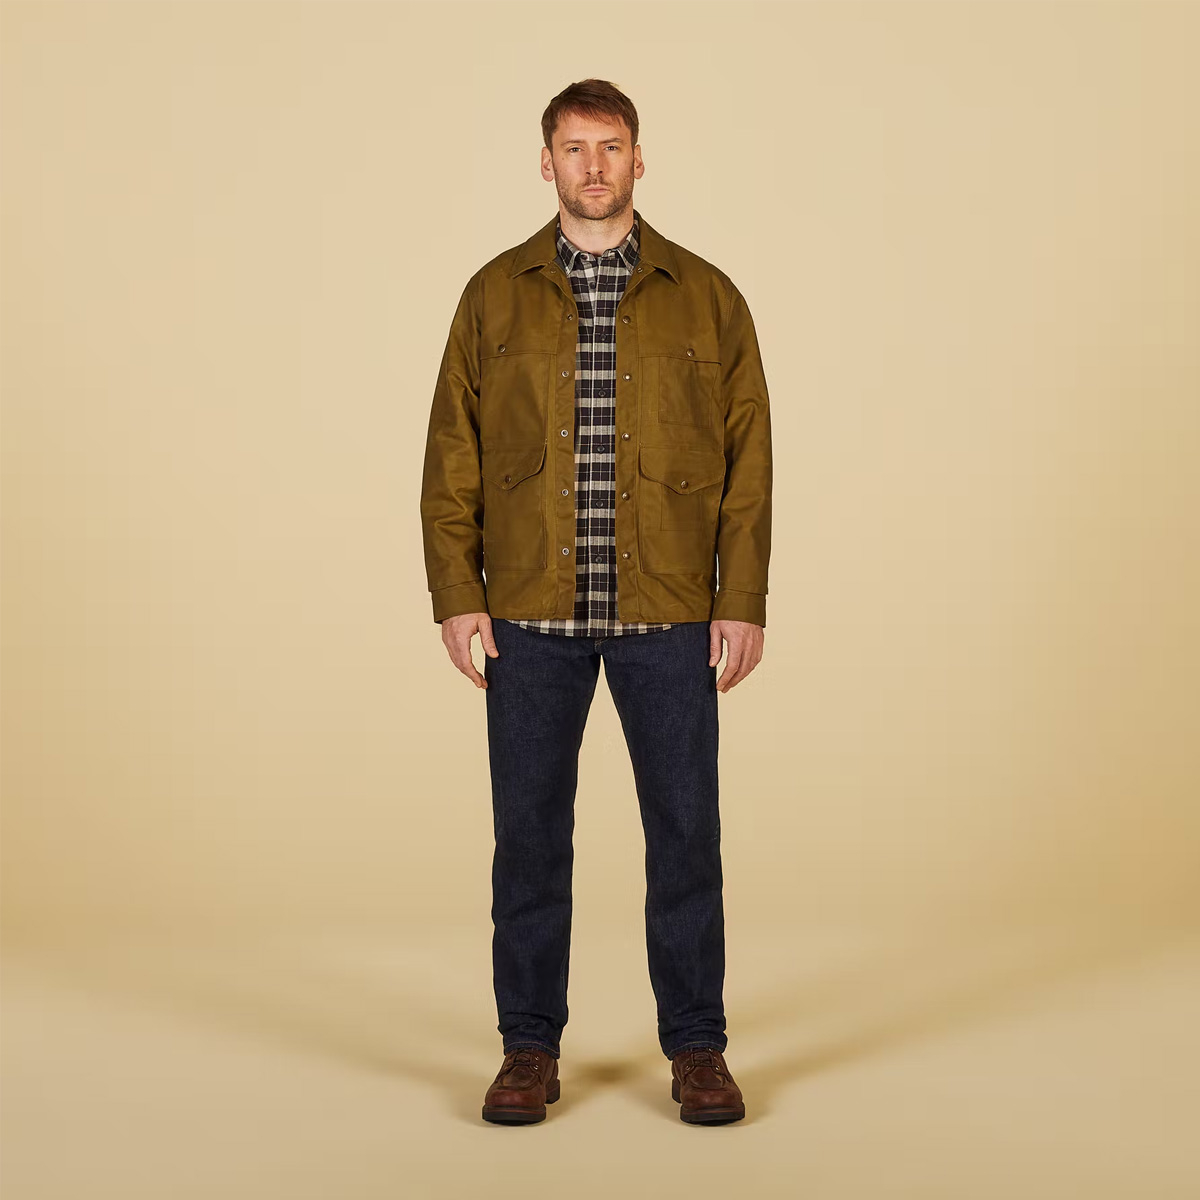 Filson Lined Tin Cloth Cruiser Jacket Dark Tan, a classic Cruiser that has provided tough-as-nails protection in the field